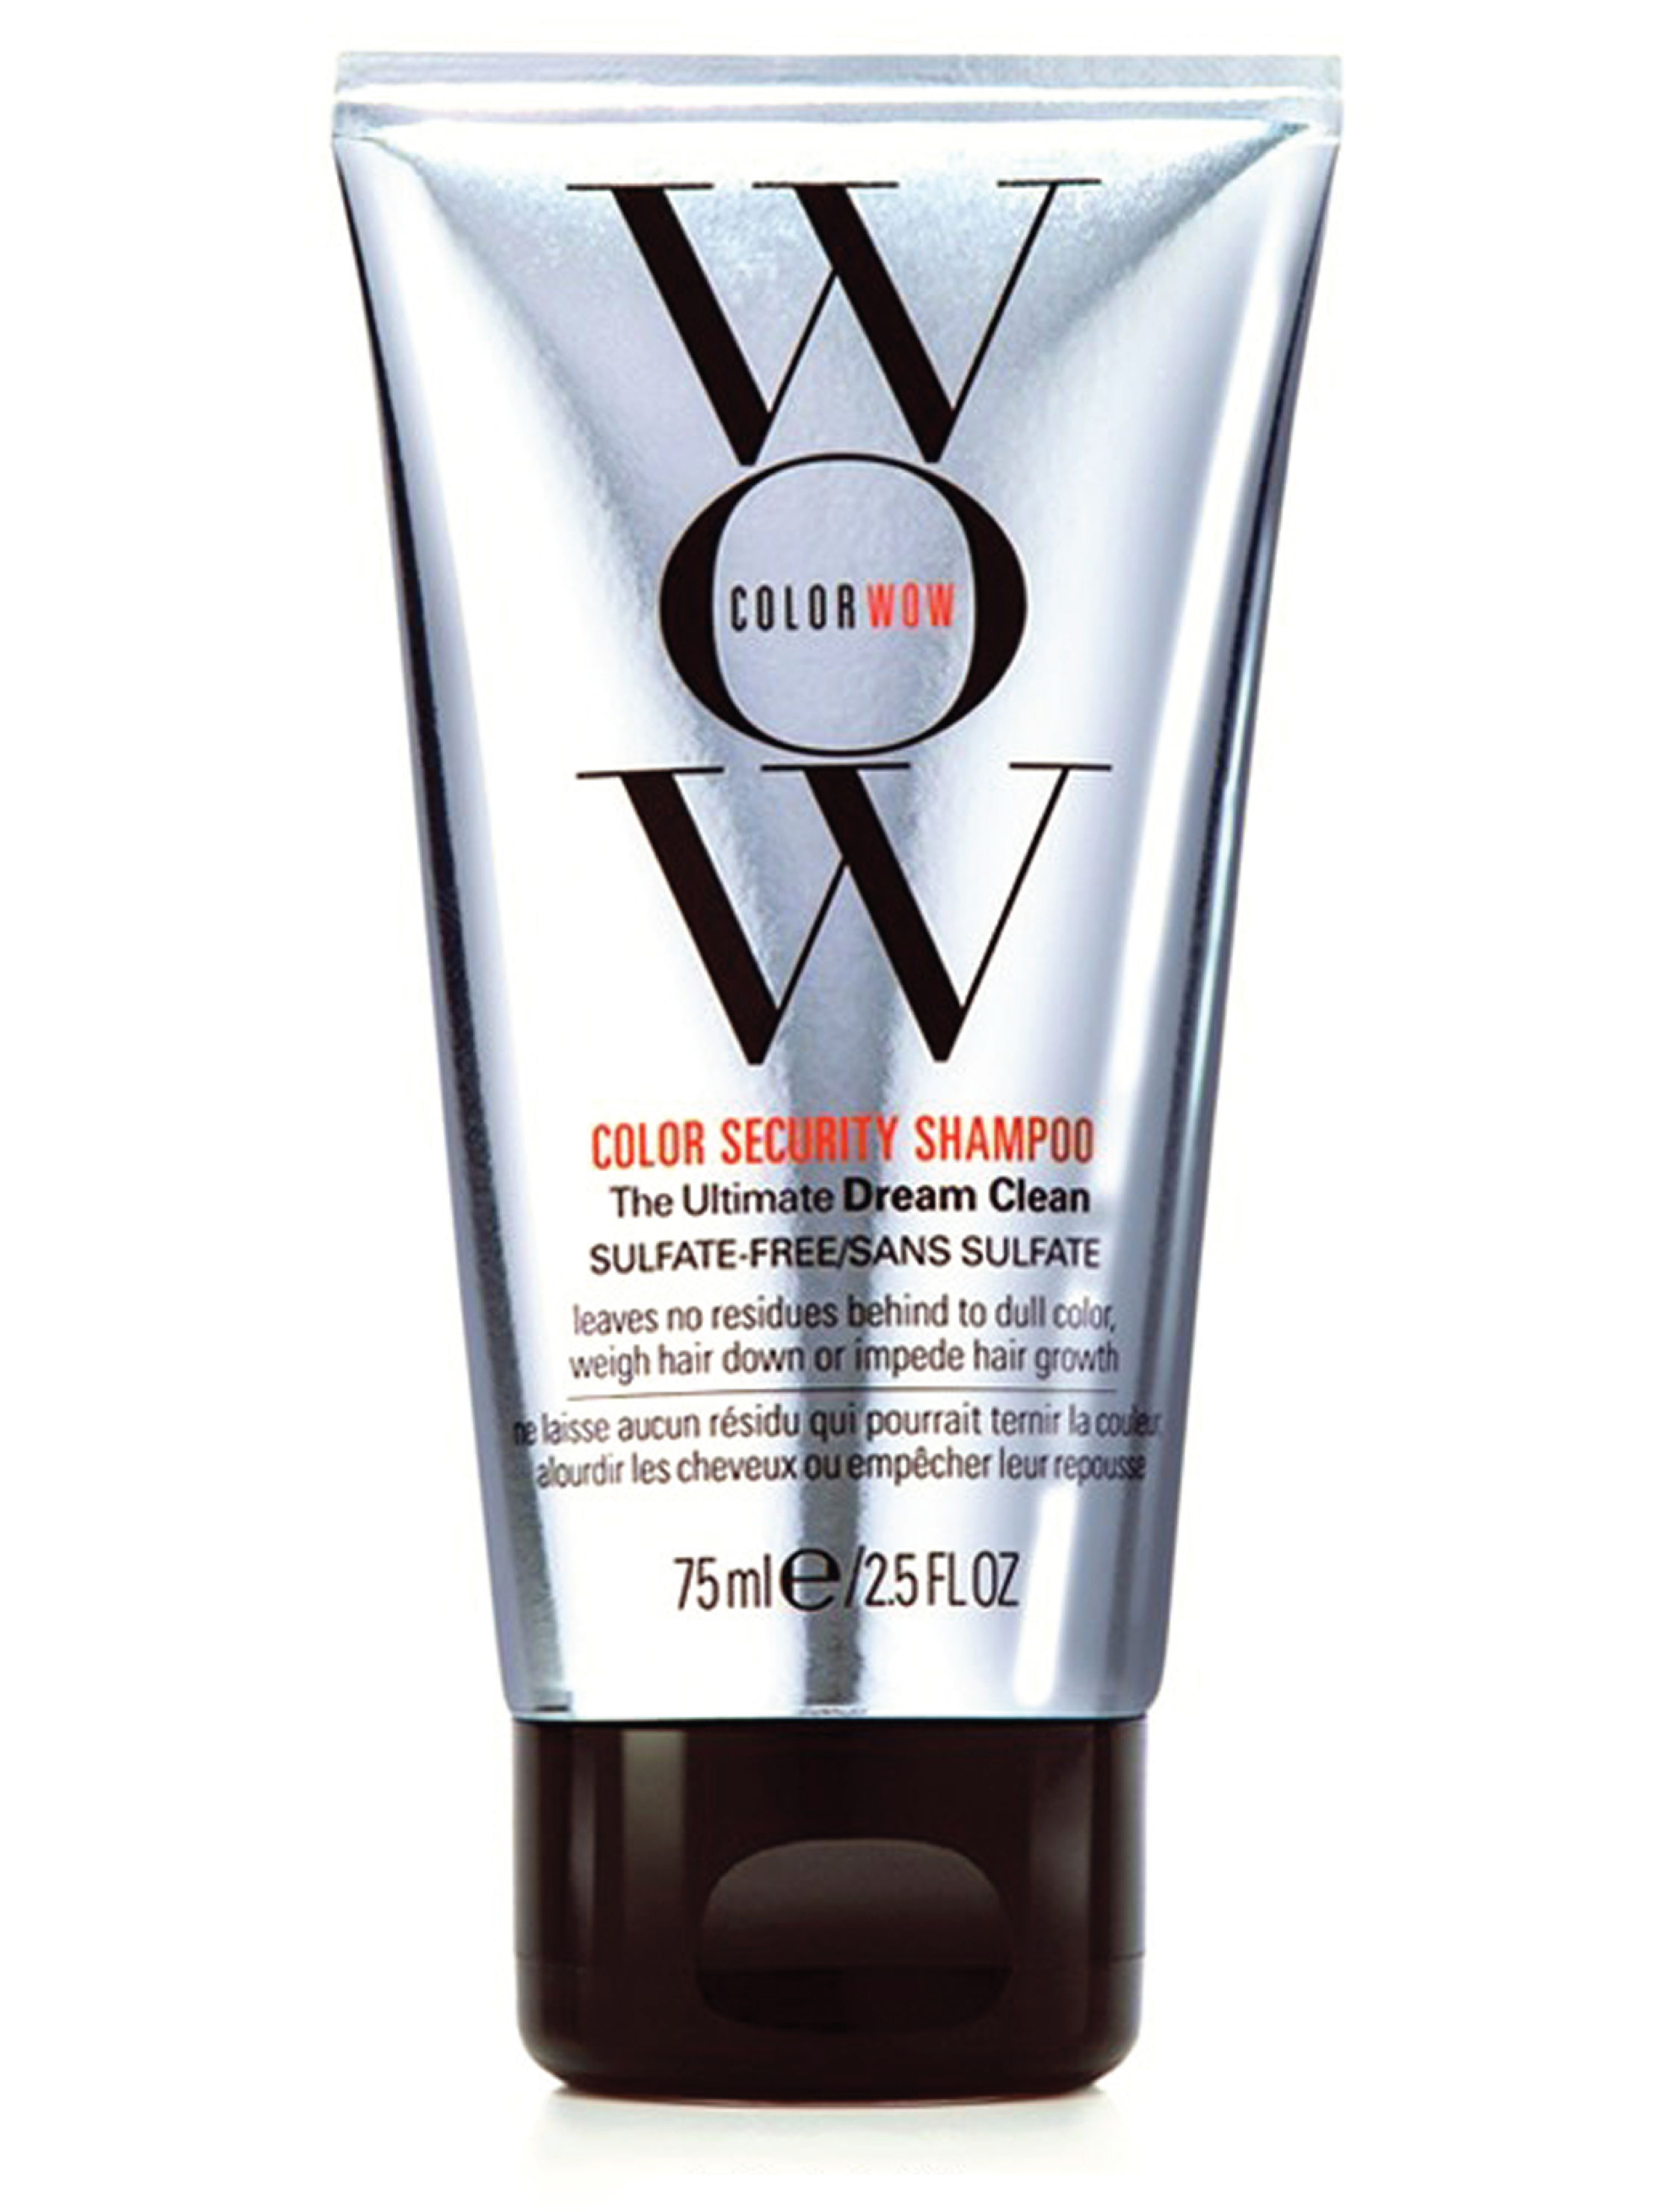 Color Wow Travel Color Security Shampoo, 75 ml